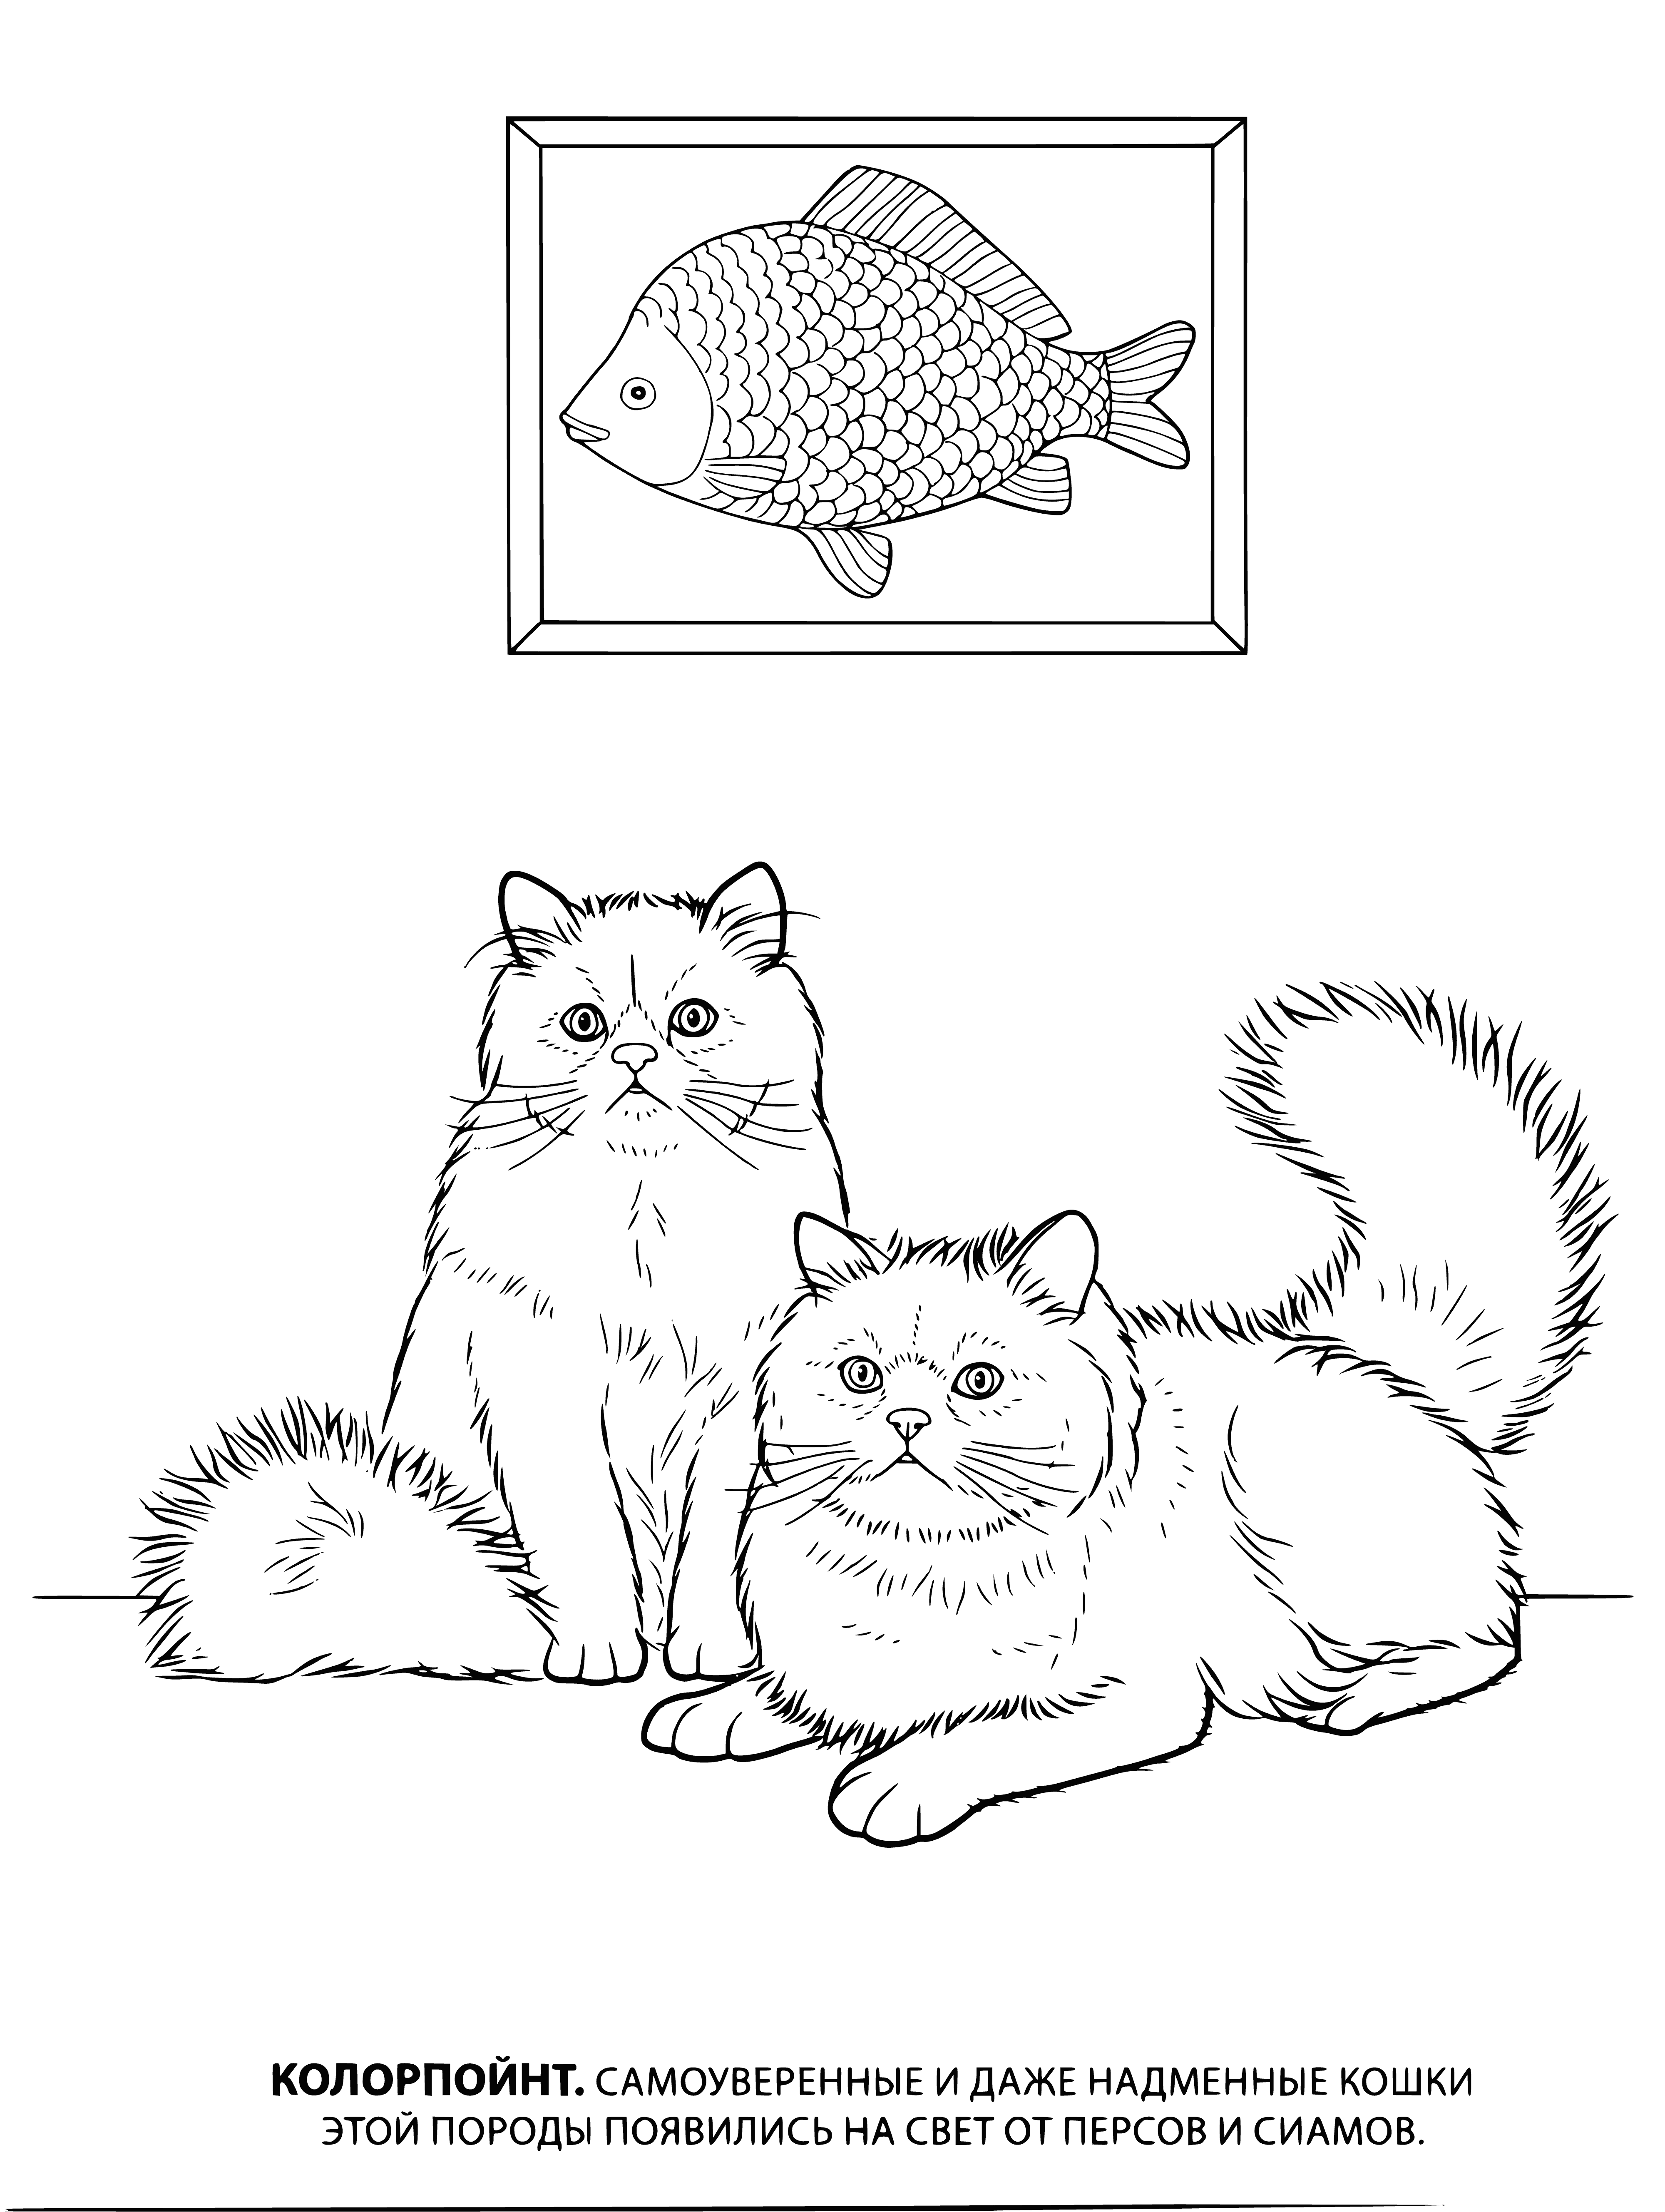 coloring page: Two cats, one brown & white and the other gray & white, cuddled up together with pointy ears.